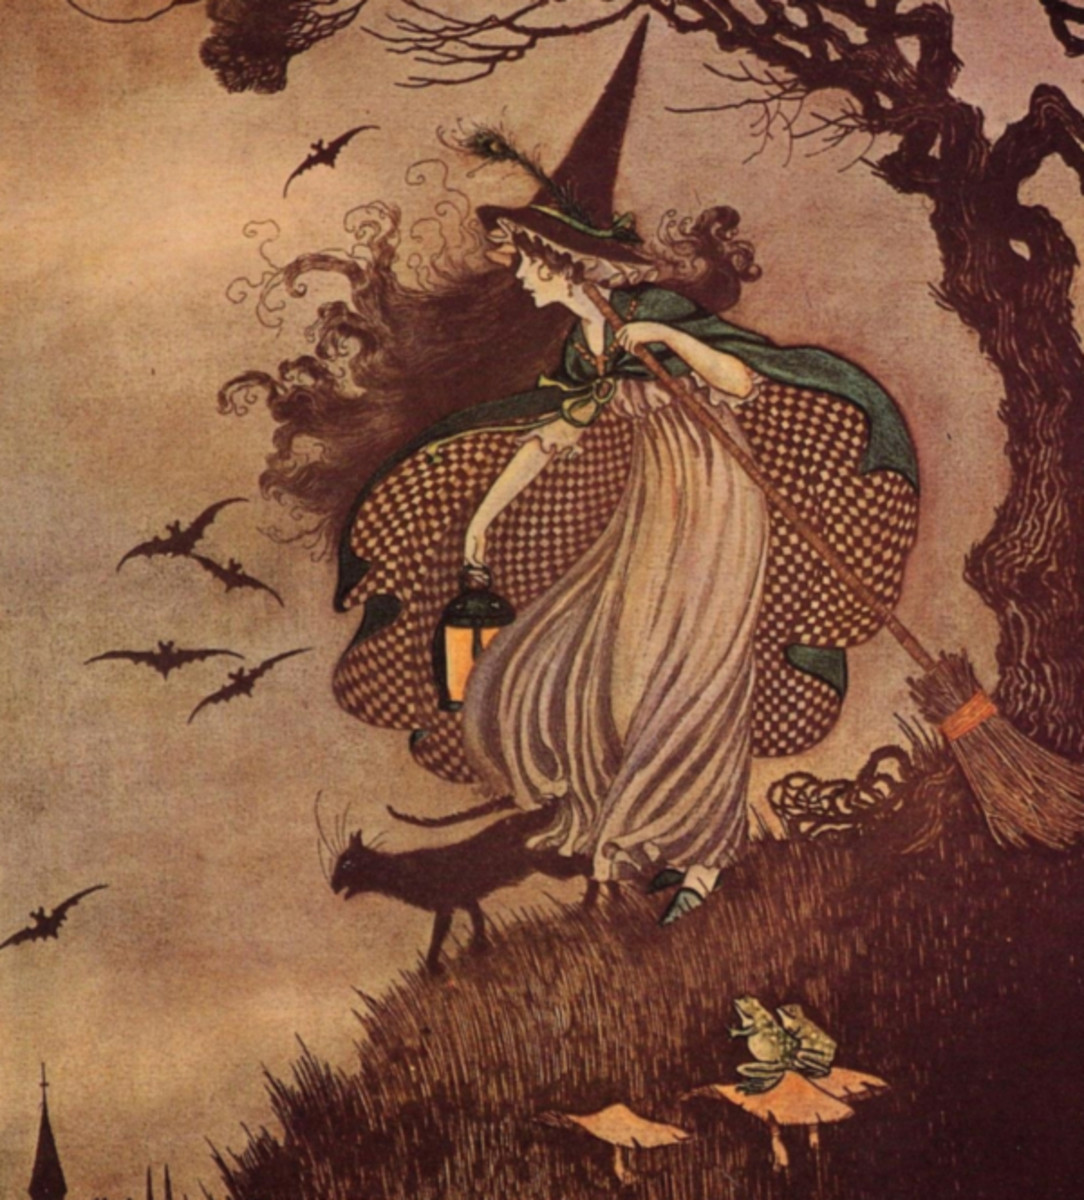 Here we show a portion of 'The Little Witch' - it is from Ida Rentoul Outhwaite's suite published in "Elves and Fairies" (1916).